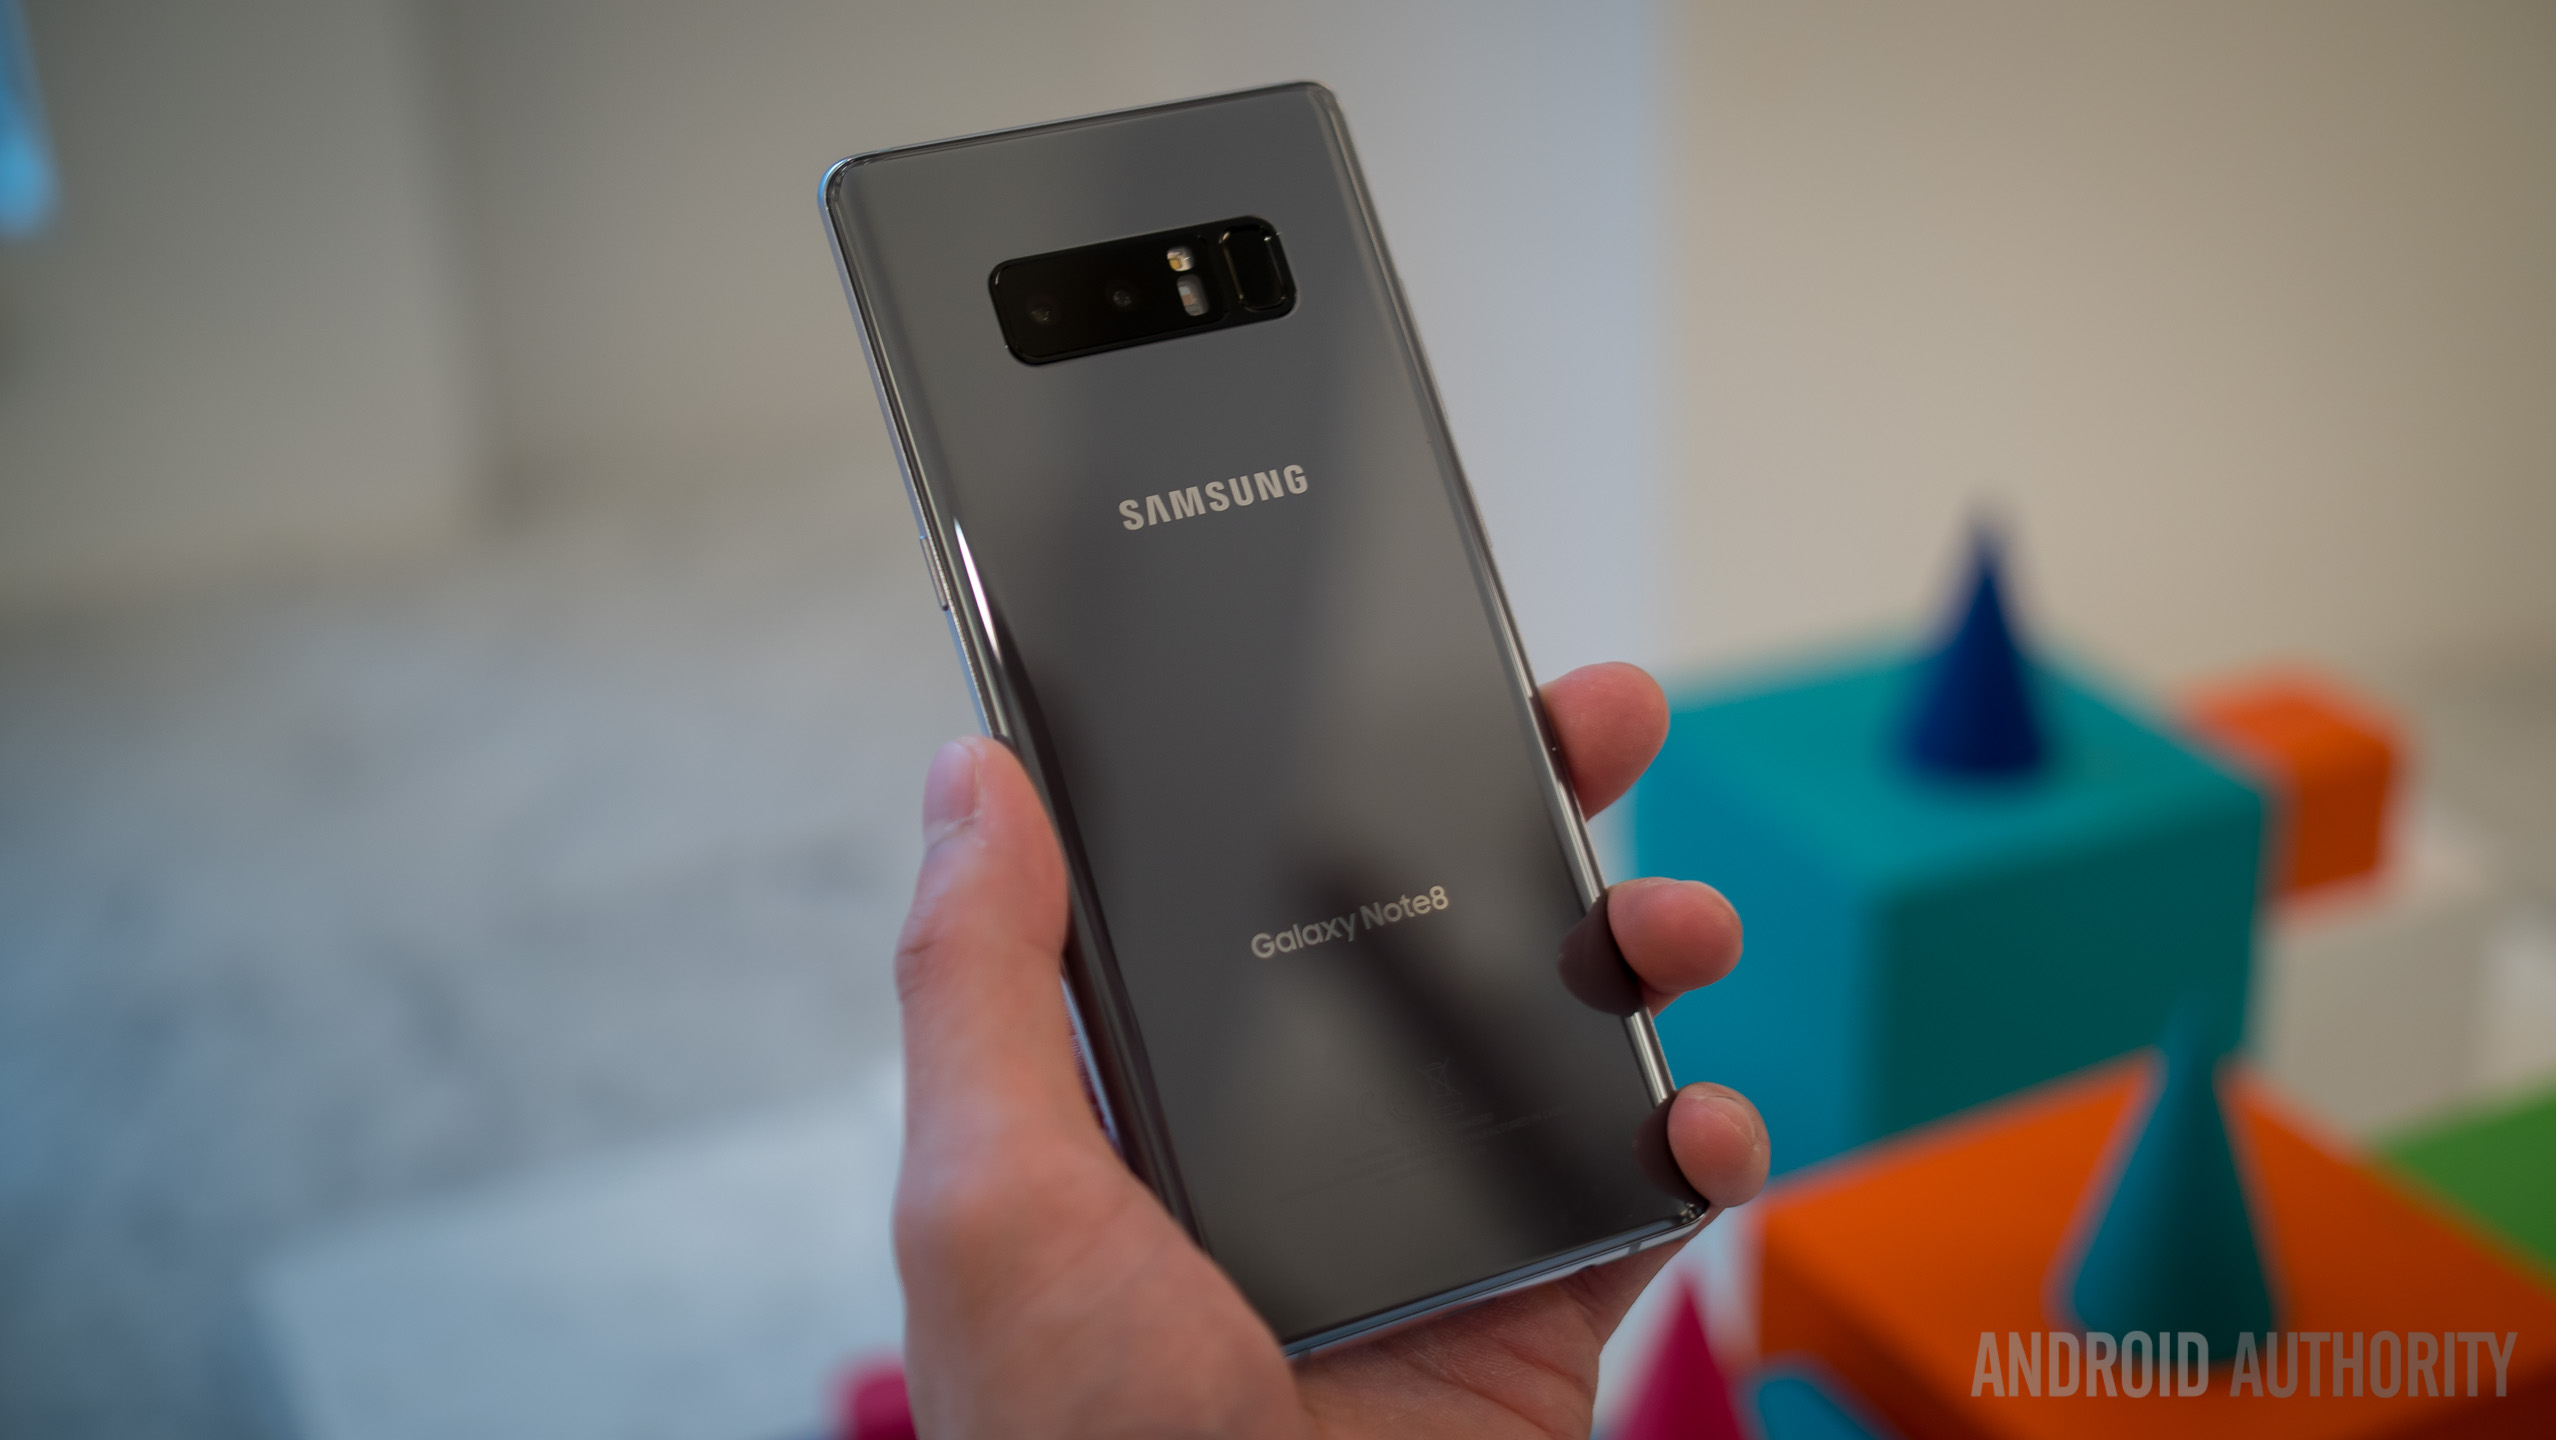 Samsung Galaxy Note 8 specs - perfection on paper - Android Authority